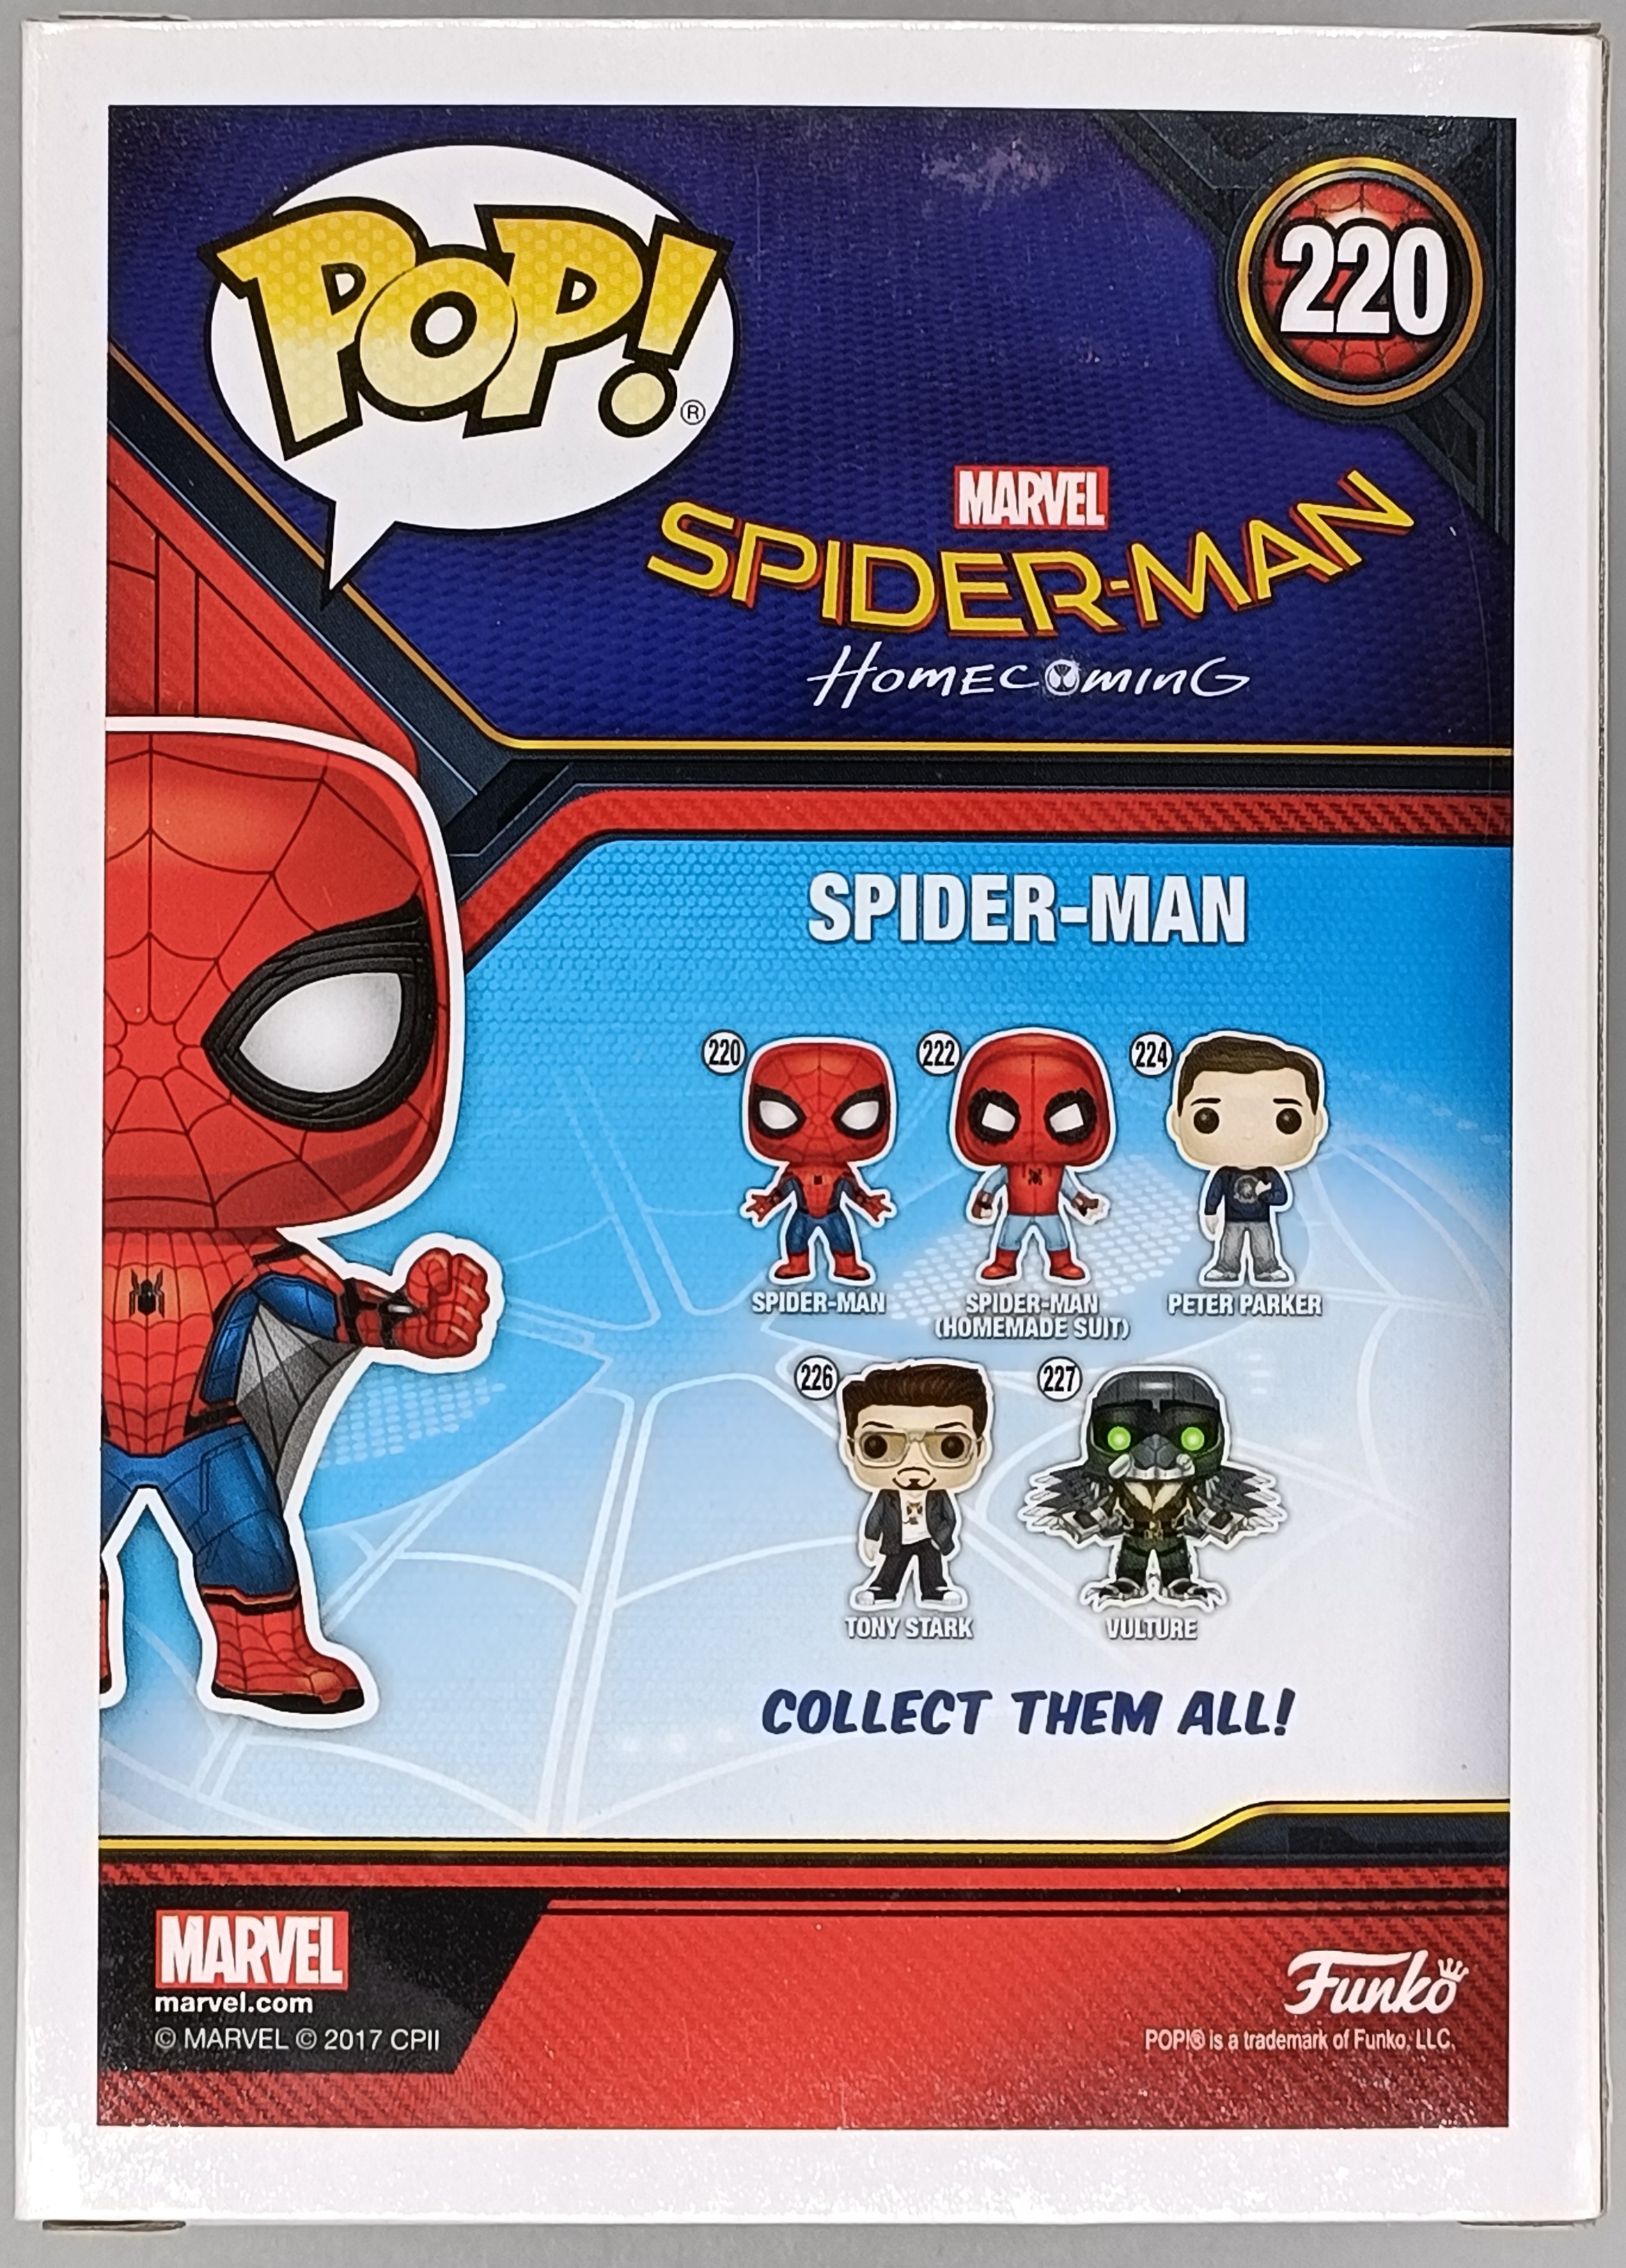 Funko Pop Box Only Marvel Spider-Man Home Coming Spider-Man 220 